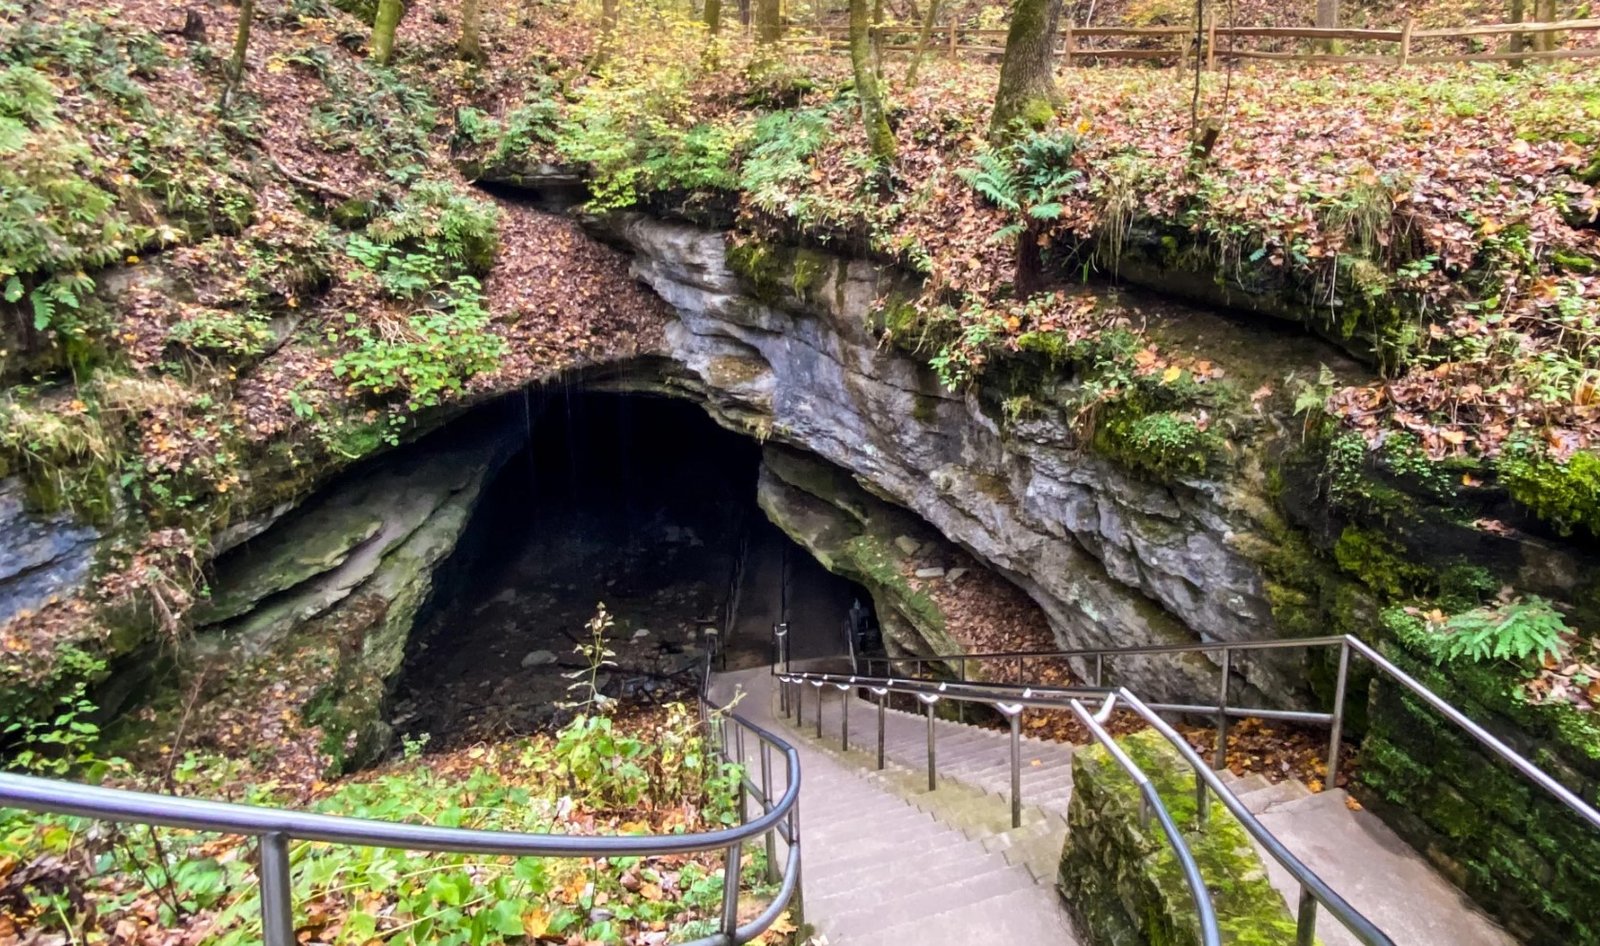 Mammoth-Cave-National-Park